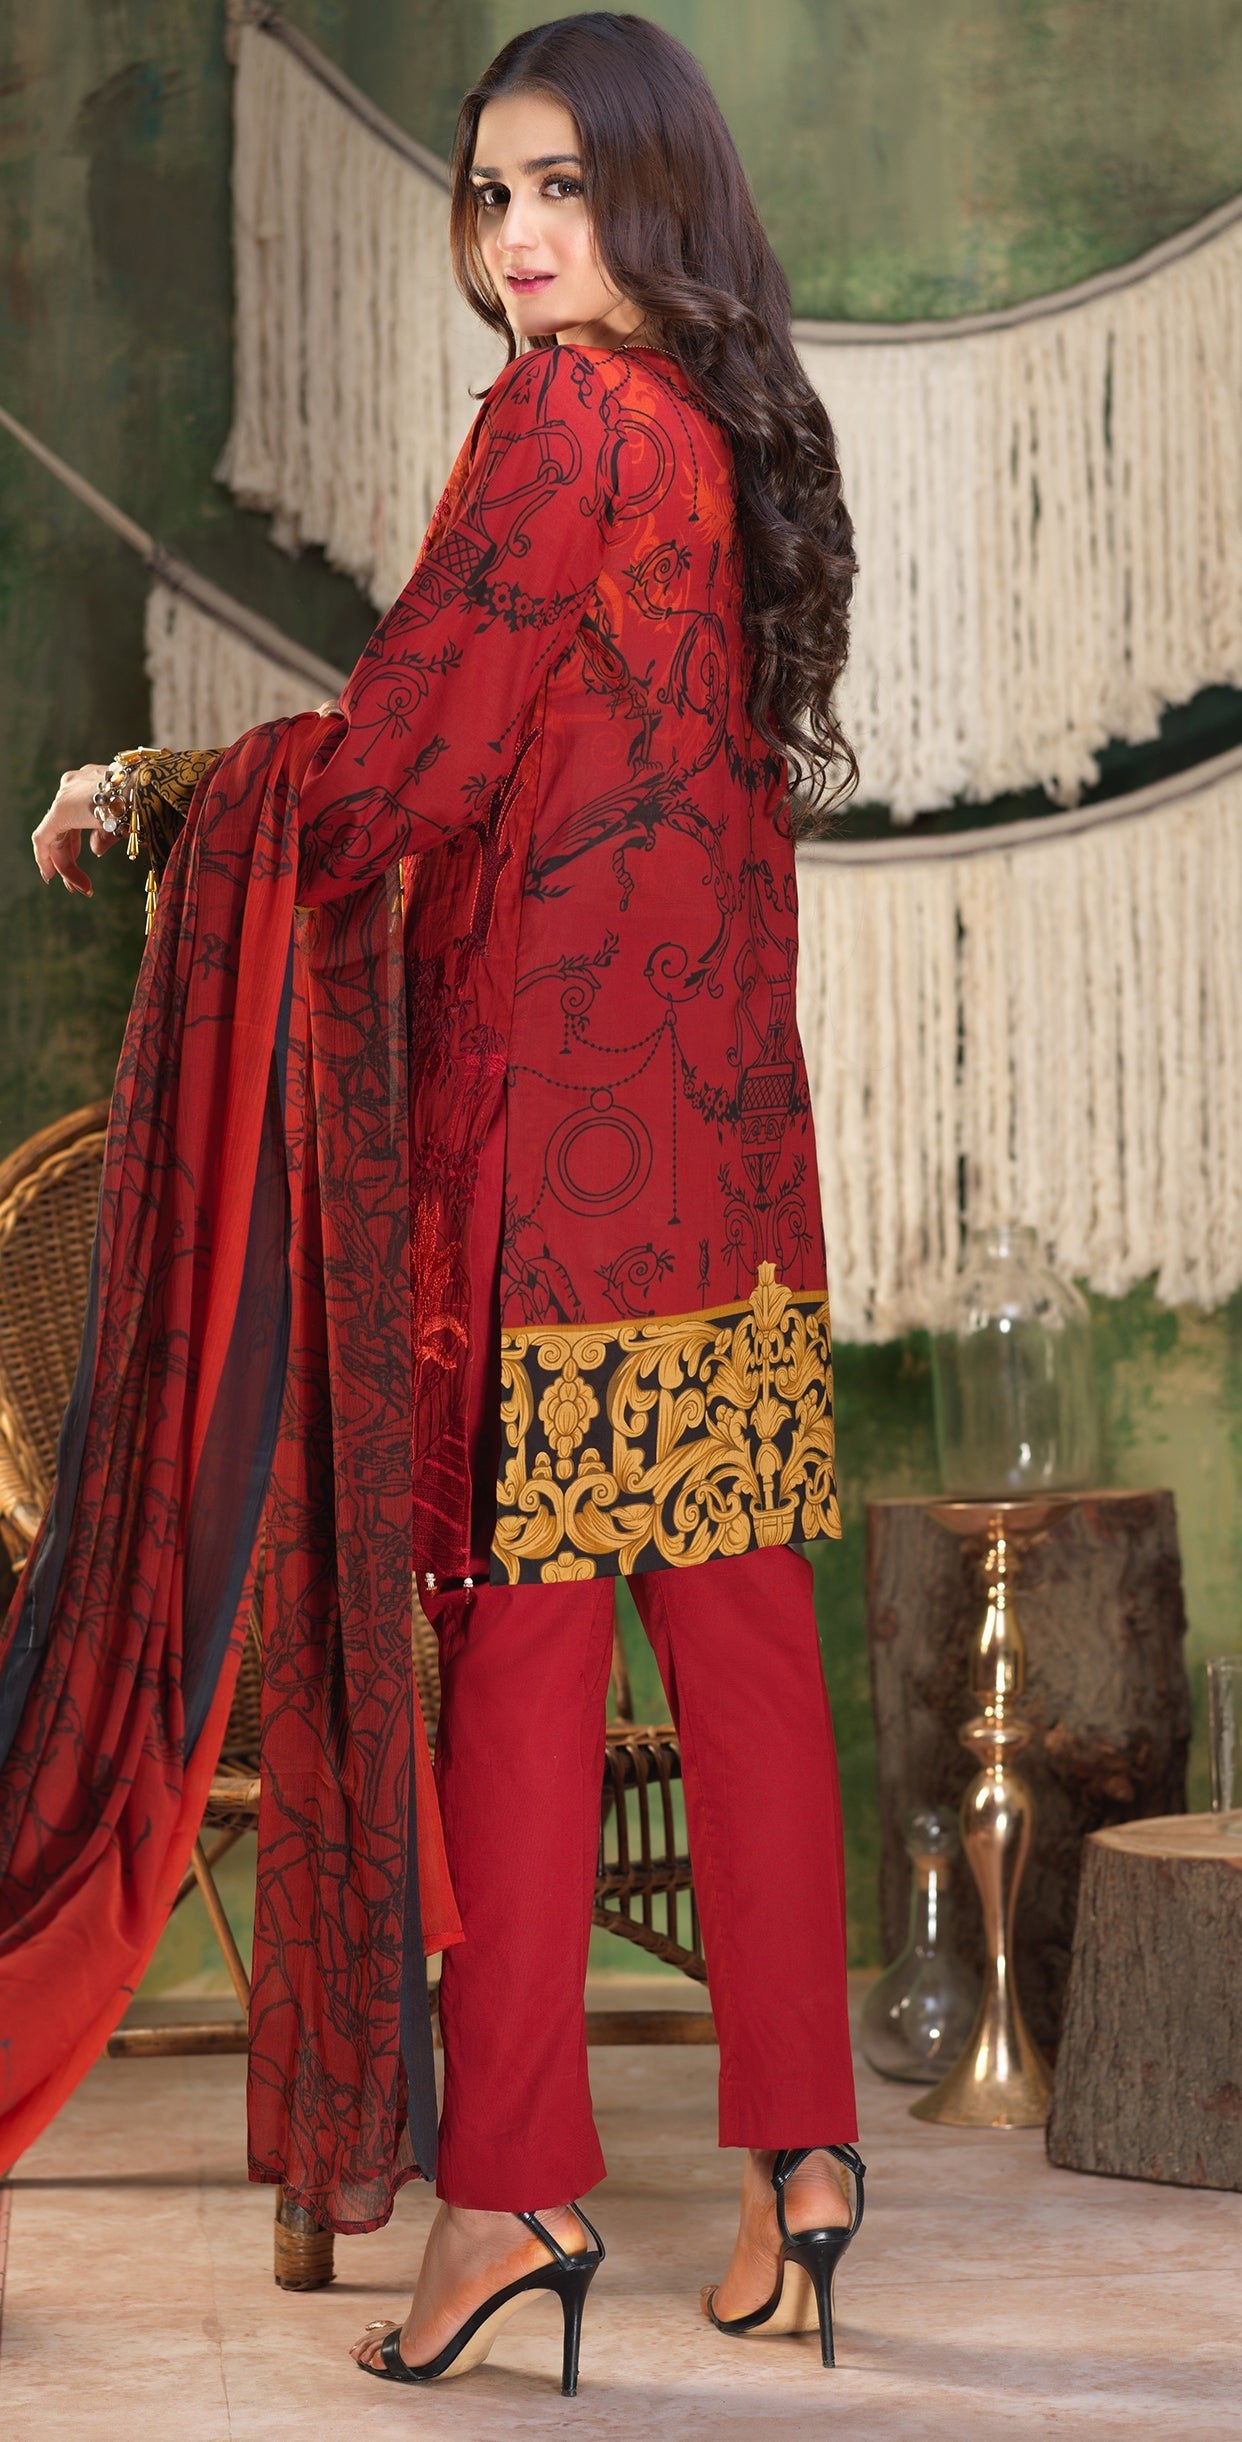 Stitched Printed Lawn Shirt with Embroidered Front , Printed Chiffon Dupatta & Cambric Trouser I Z'ure 3pc (WK-313A) - SalitexOnline